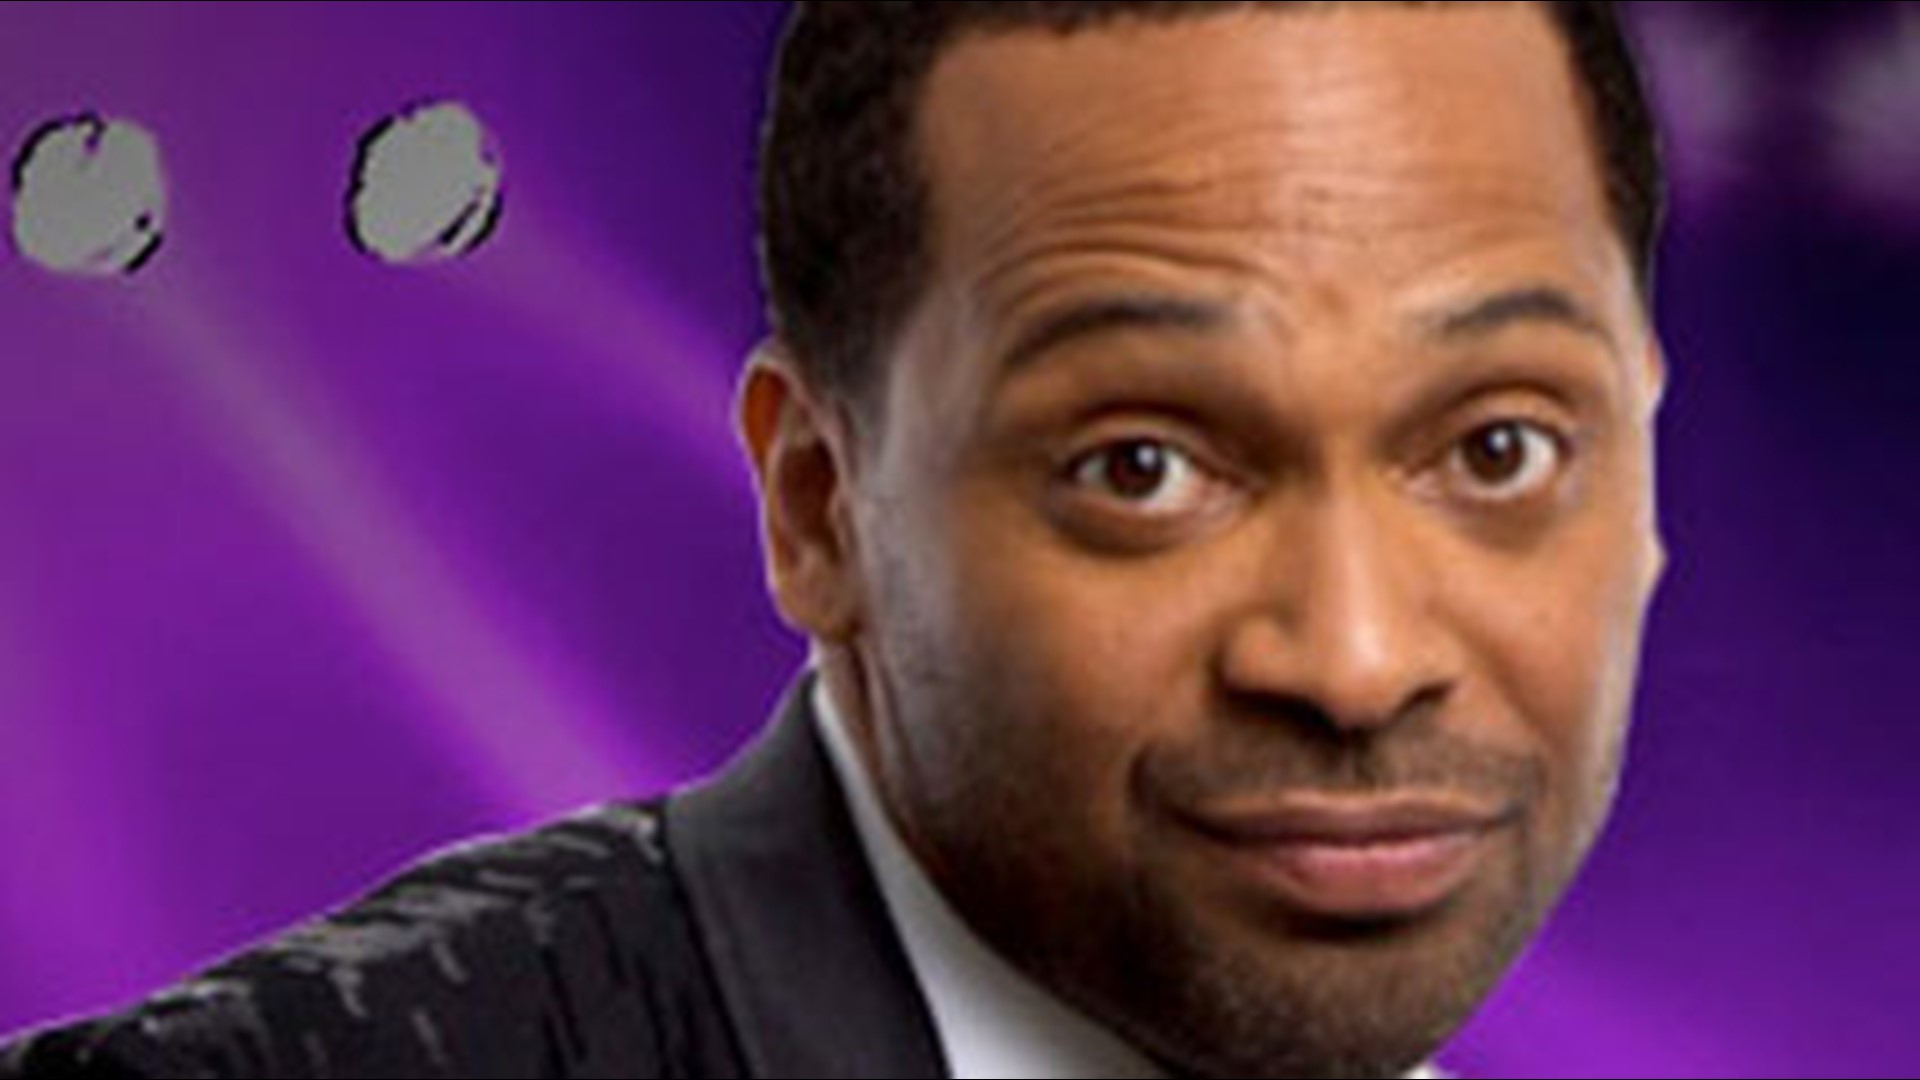 The comedian will perform two shows Saturday, Nov. 20 that will tape live at 6 p.m. and 10 p.m.